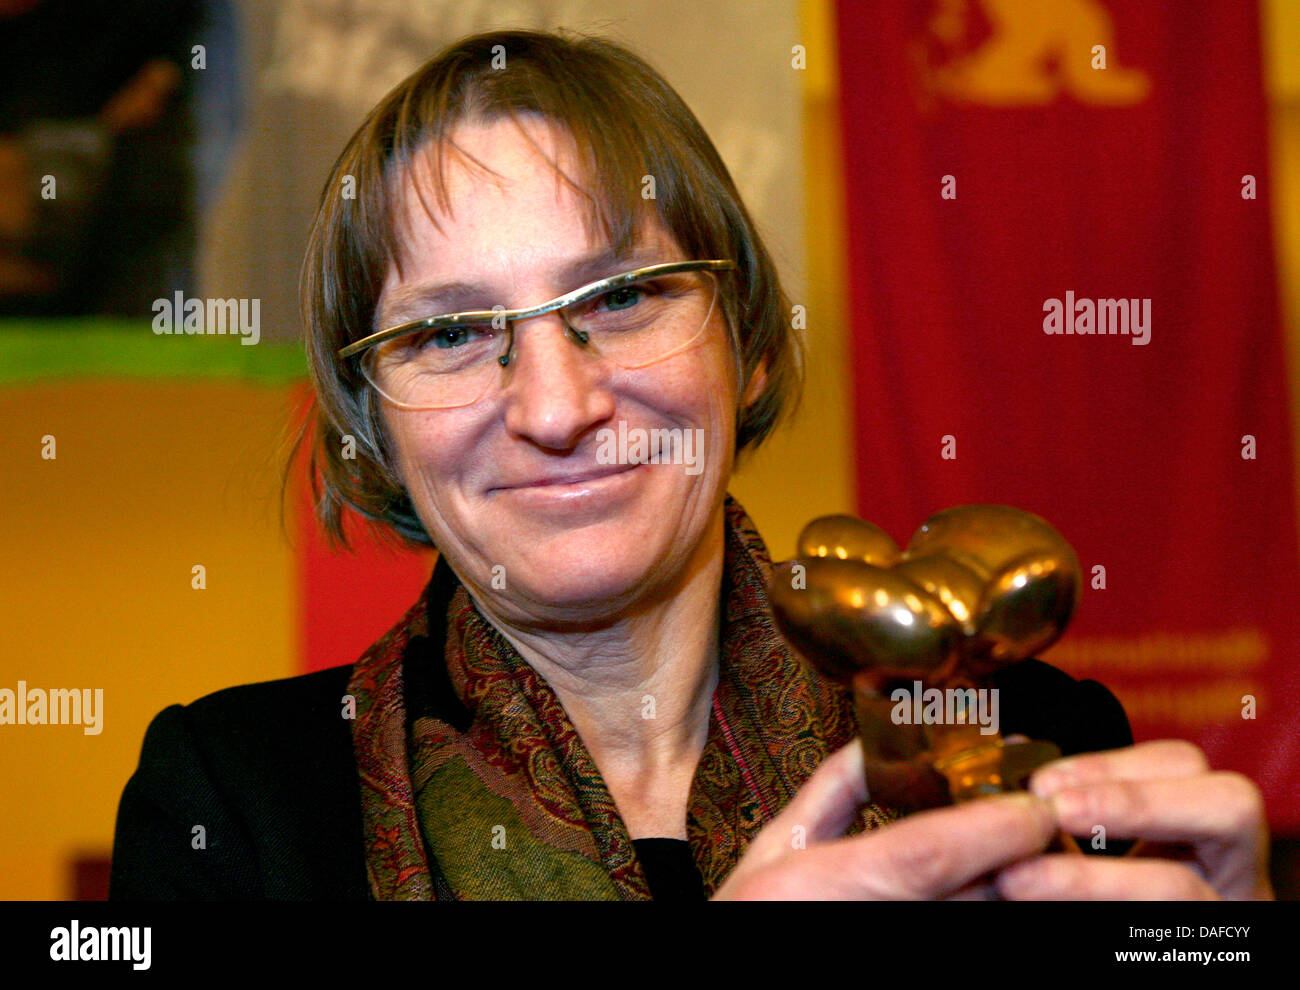 Dorota Kedzierzawska shows the Peace Film Prize in Babylon Kino in Berlin, Germany, 20 February 2011. The Polish director recieved the prize on the last day of the 61st Berlin International Film Festival for her film 'Jutro bedzie lepiej' (Tomorrow will be better). Photo: FLORIAN SCHUH Stock Photo